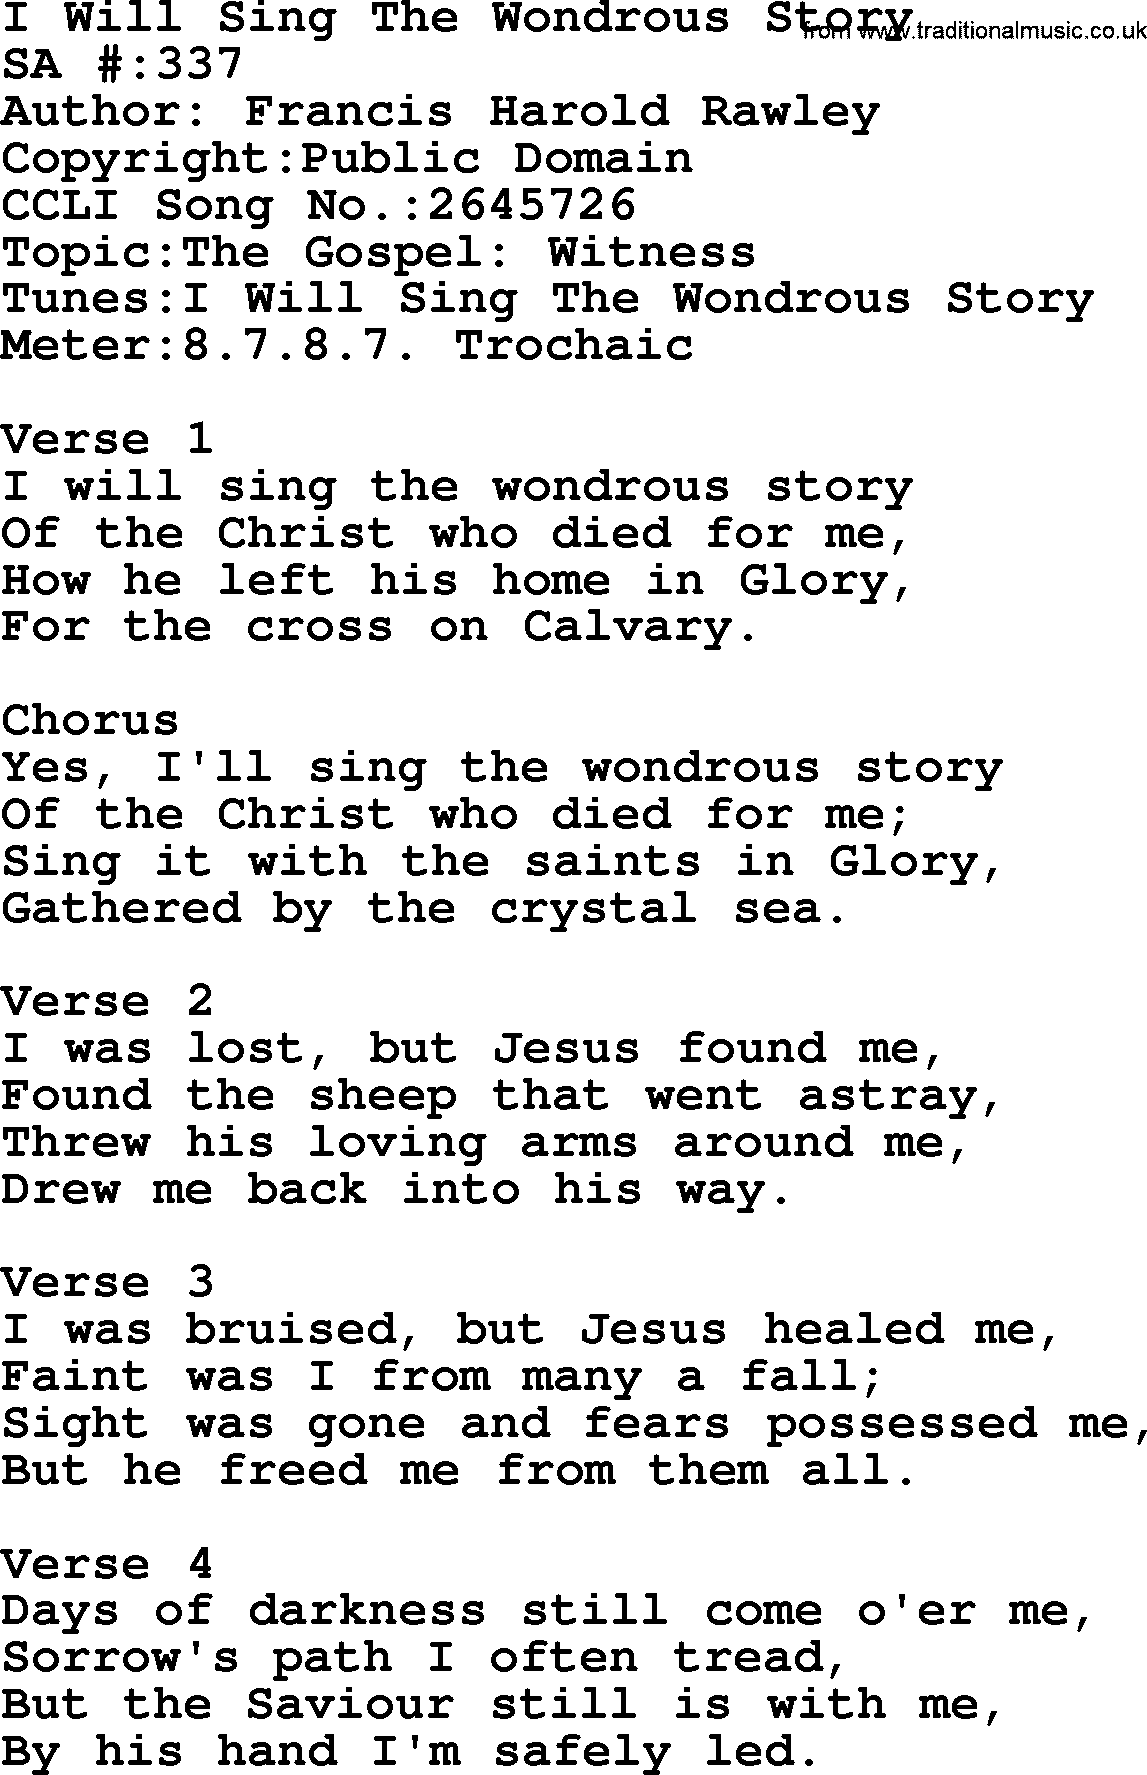 Salvation Army Hymnal, title: I Will Sing The Wondrous Story, with lyrics and PDF,